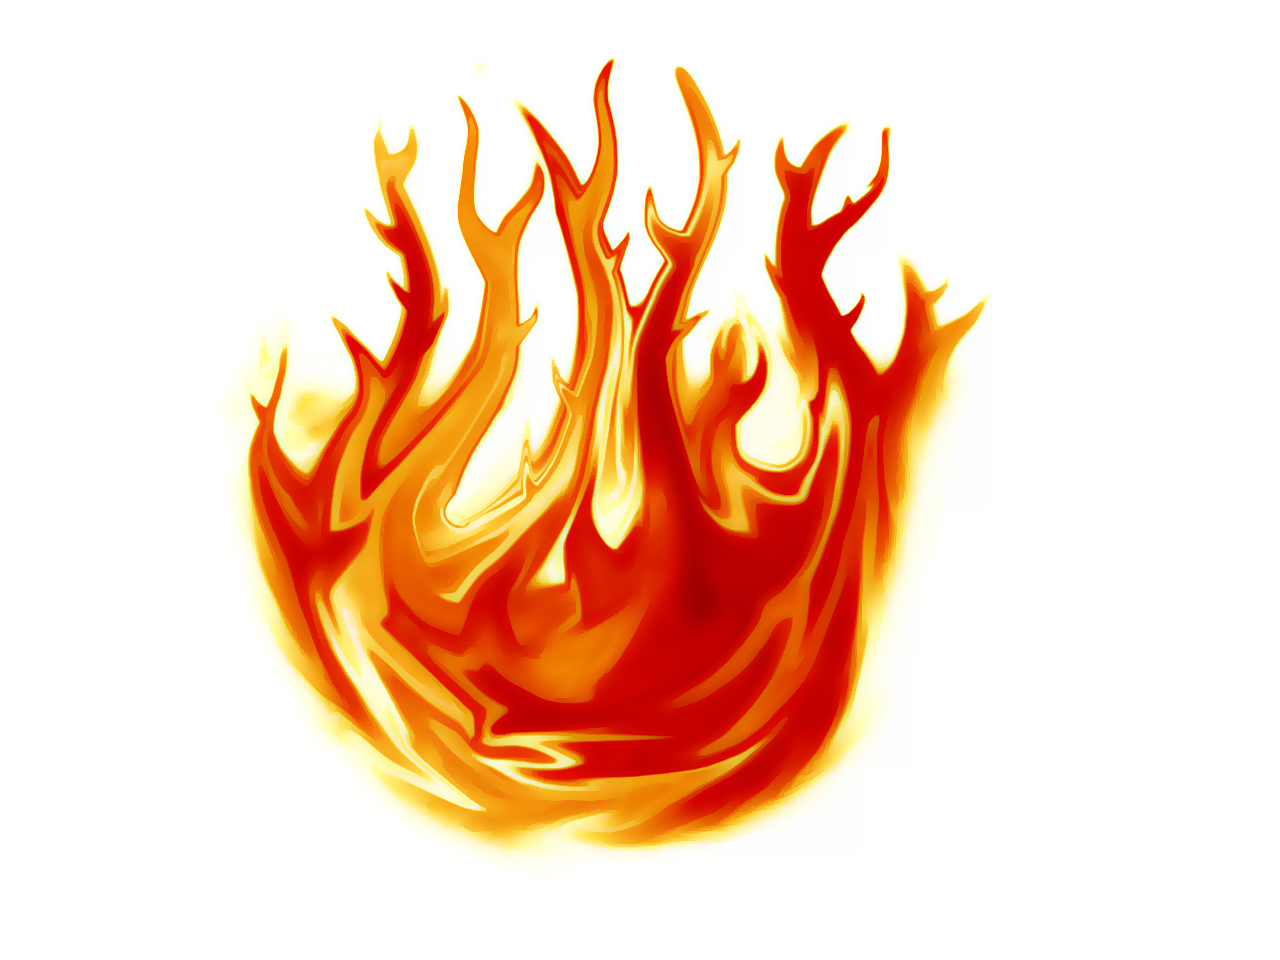 Cartoon Fireplace Flames | Clipart Panda - Free Clipart Images